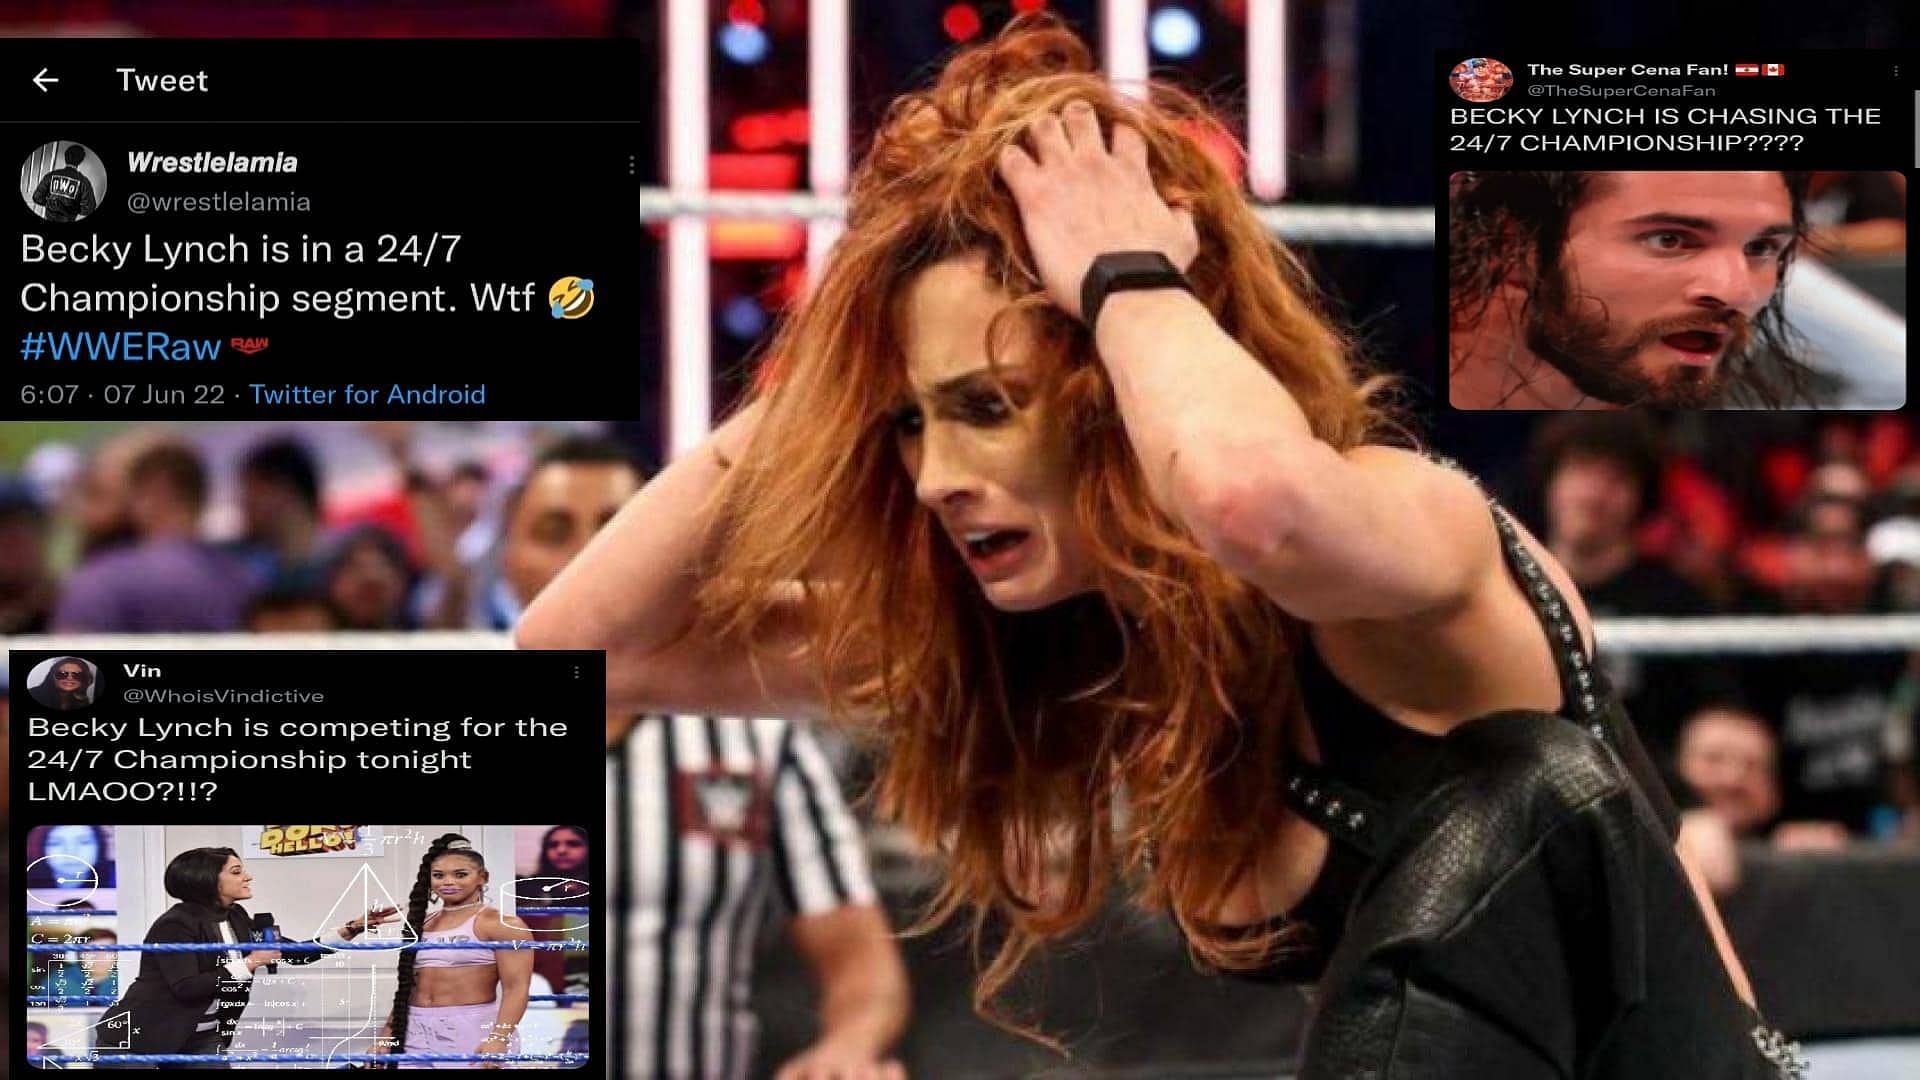 Becky Lynch competing for the 24/7 title did not sit well with some fans